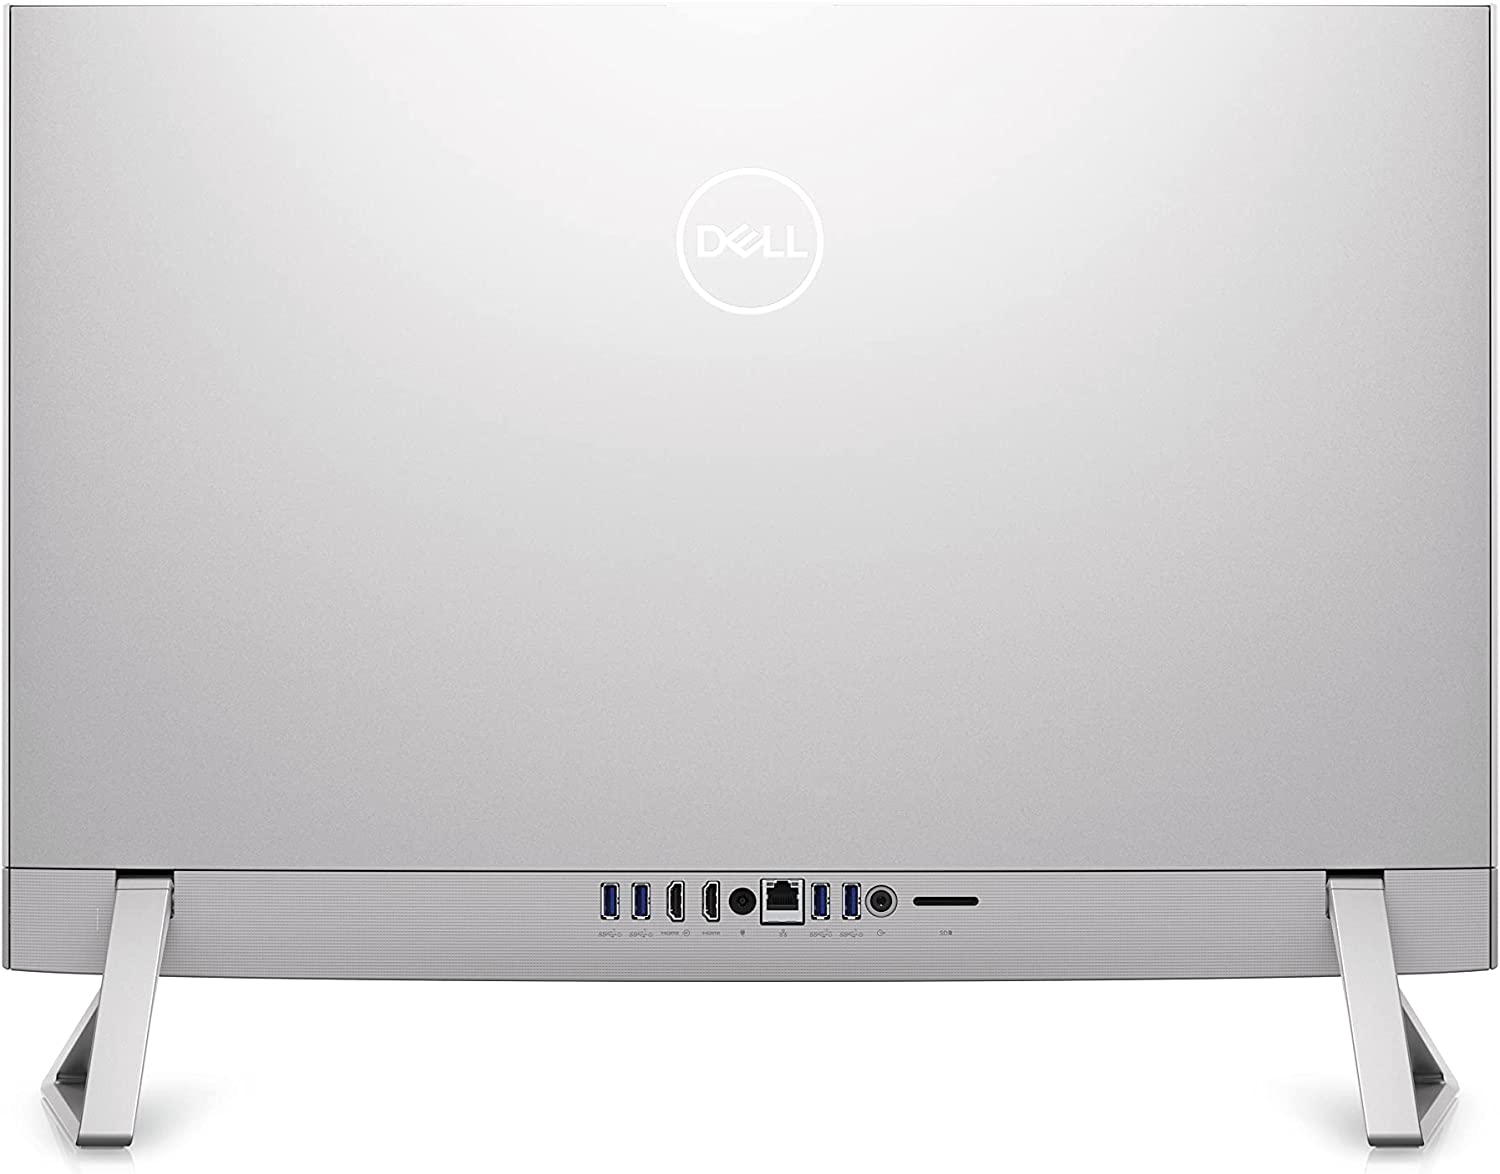 Dell Inspiron 7710 27" FHD Touchscreen All-in-One Desktop Computer